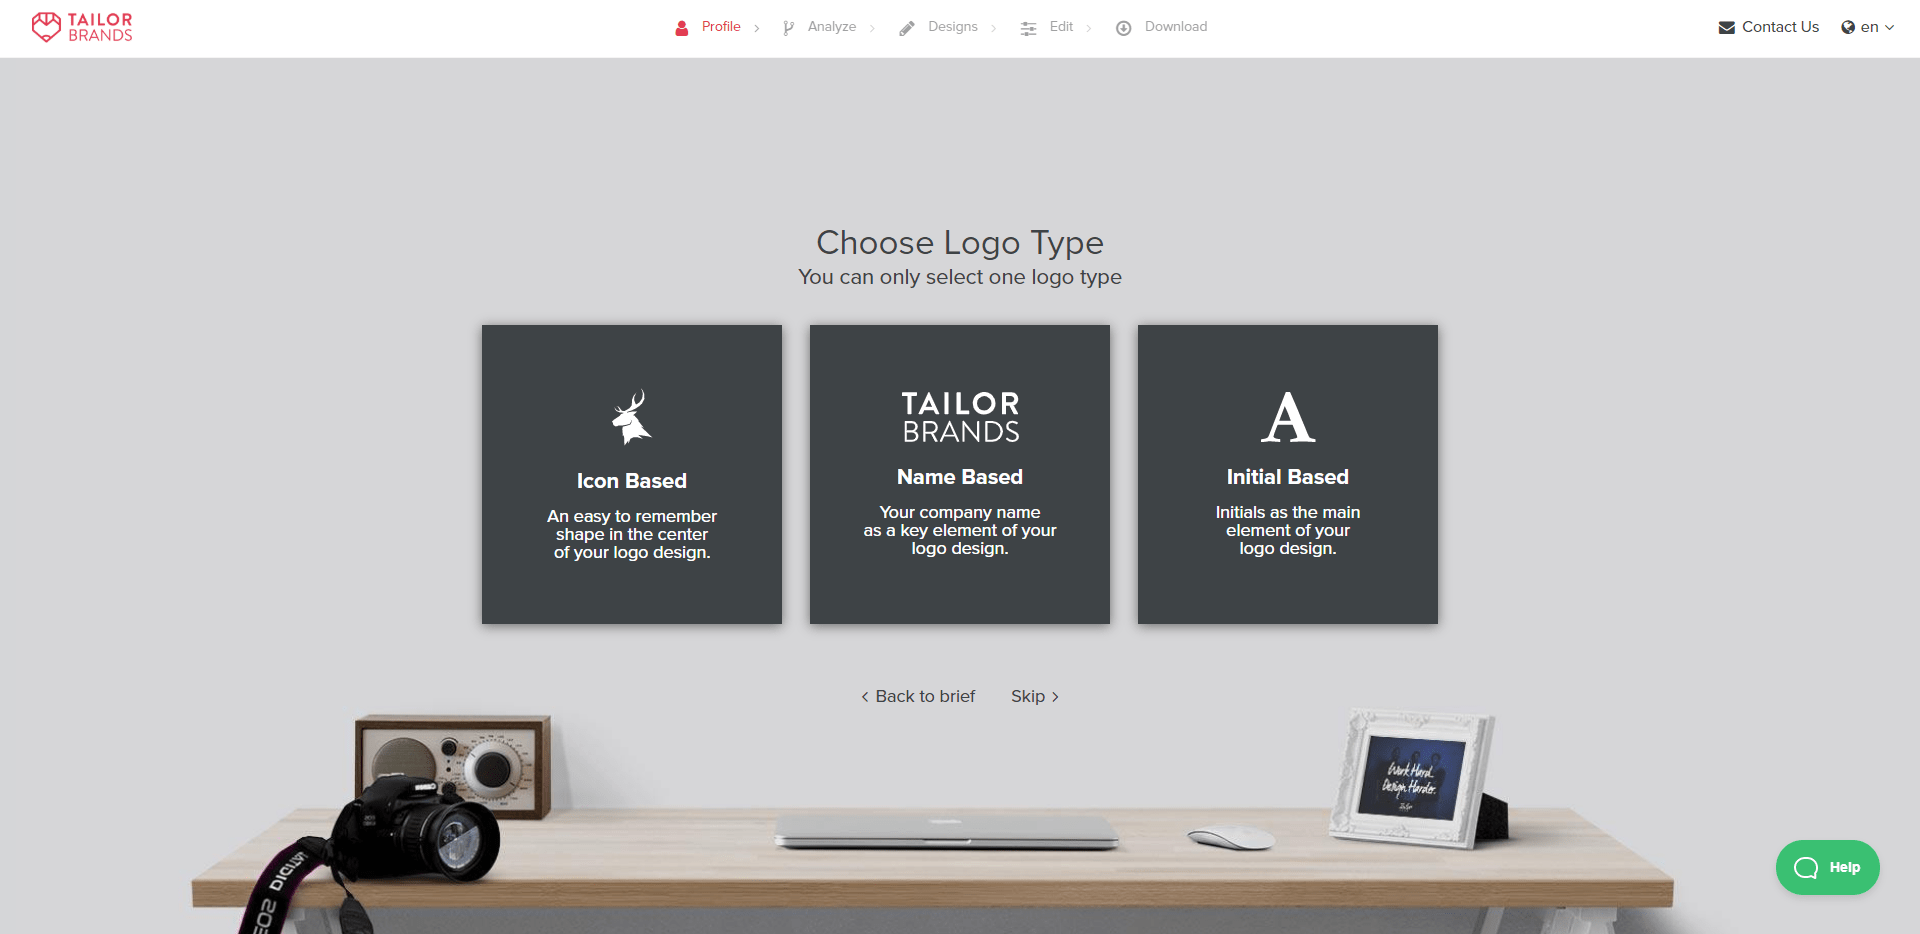 Tailor Brands - Choose your logo type landing page